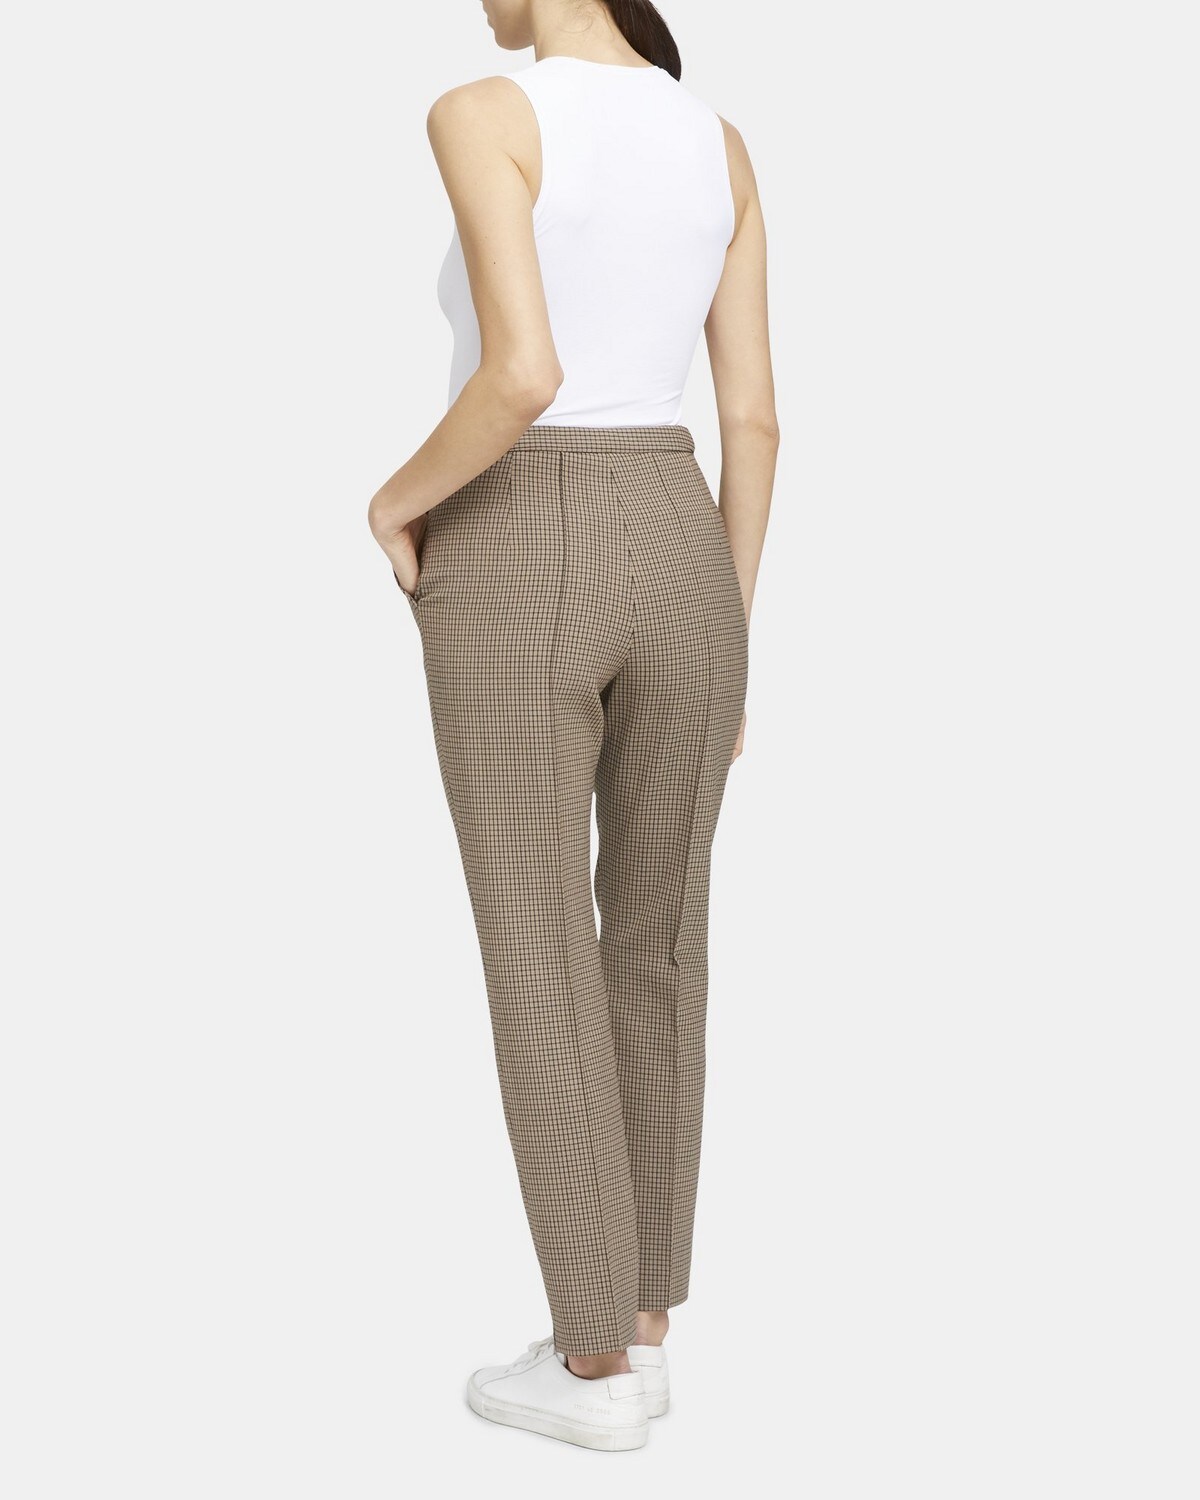 Waist-Tab Pant in Check Wool Mix